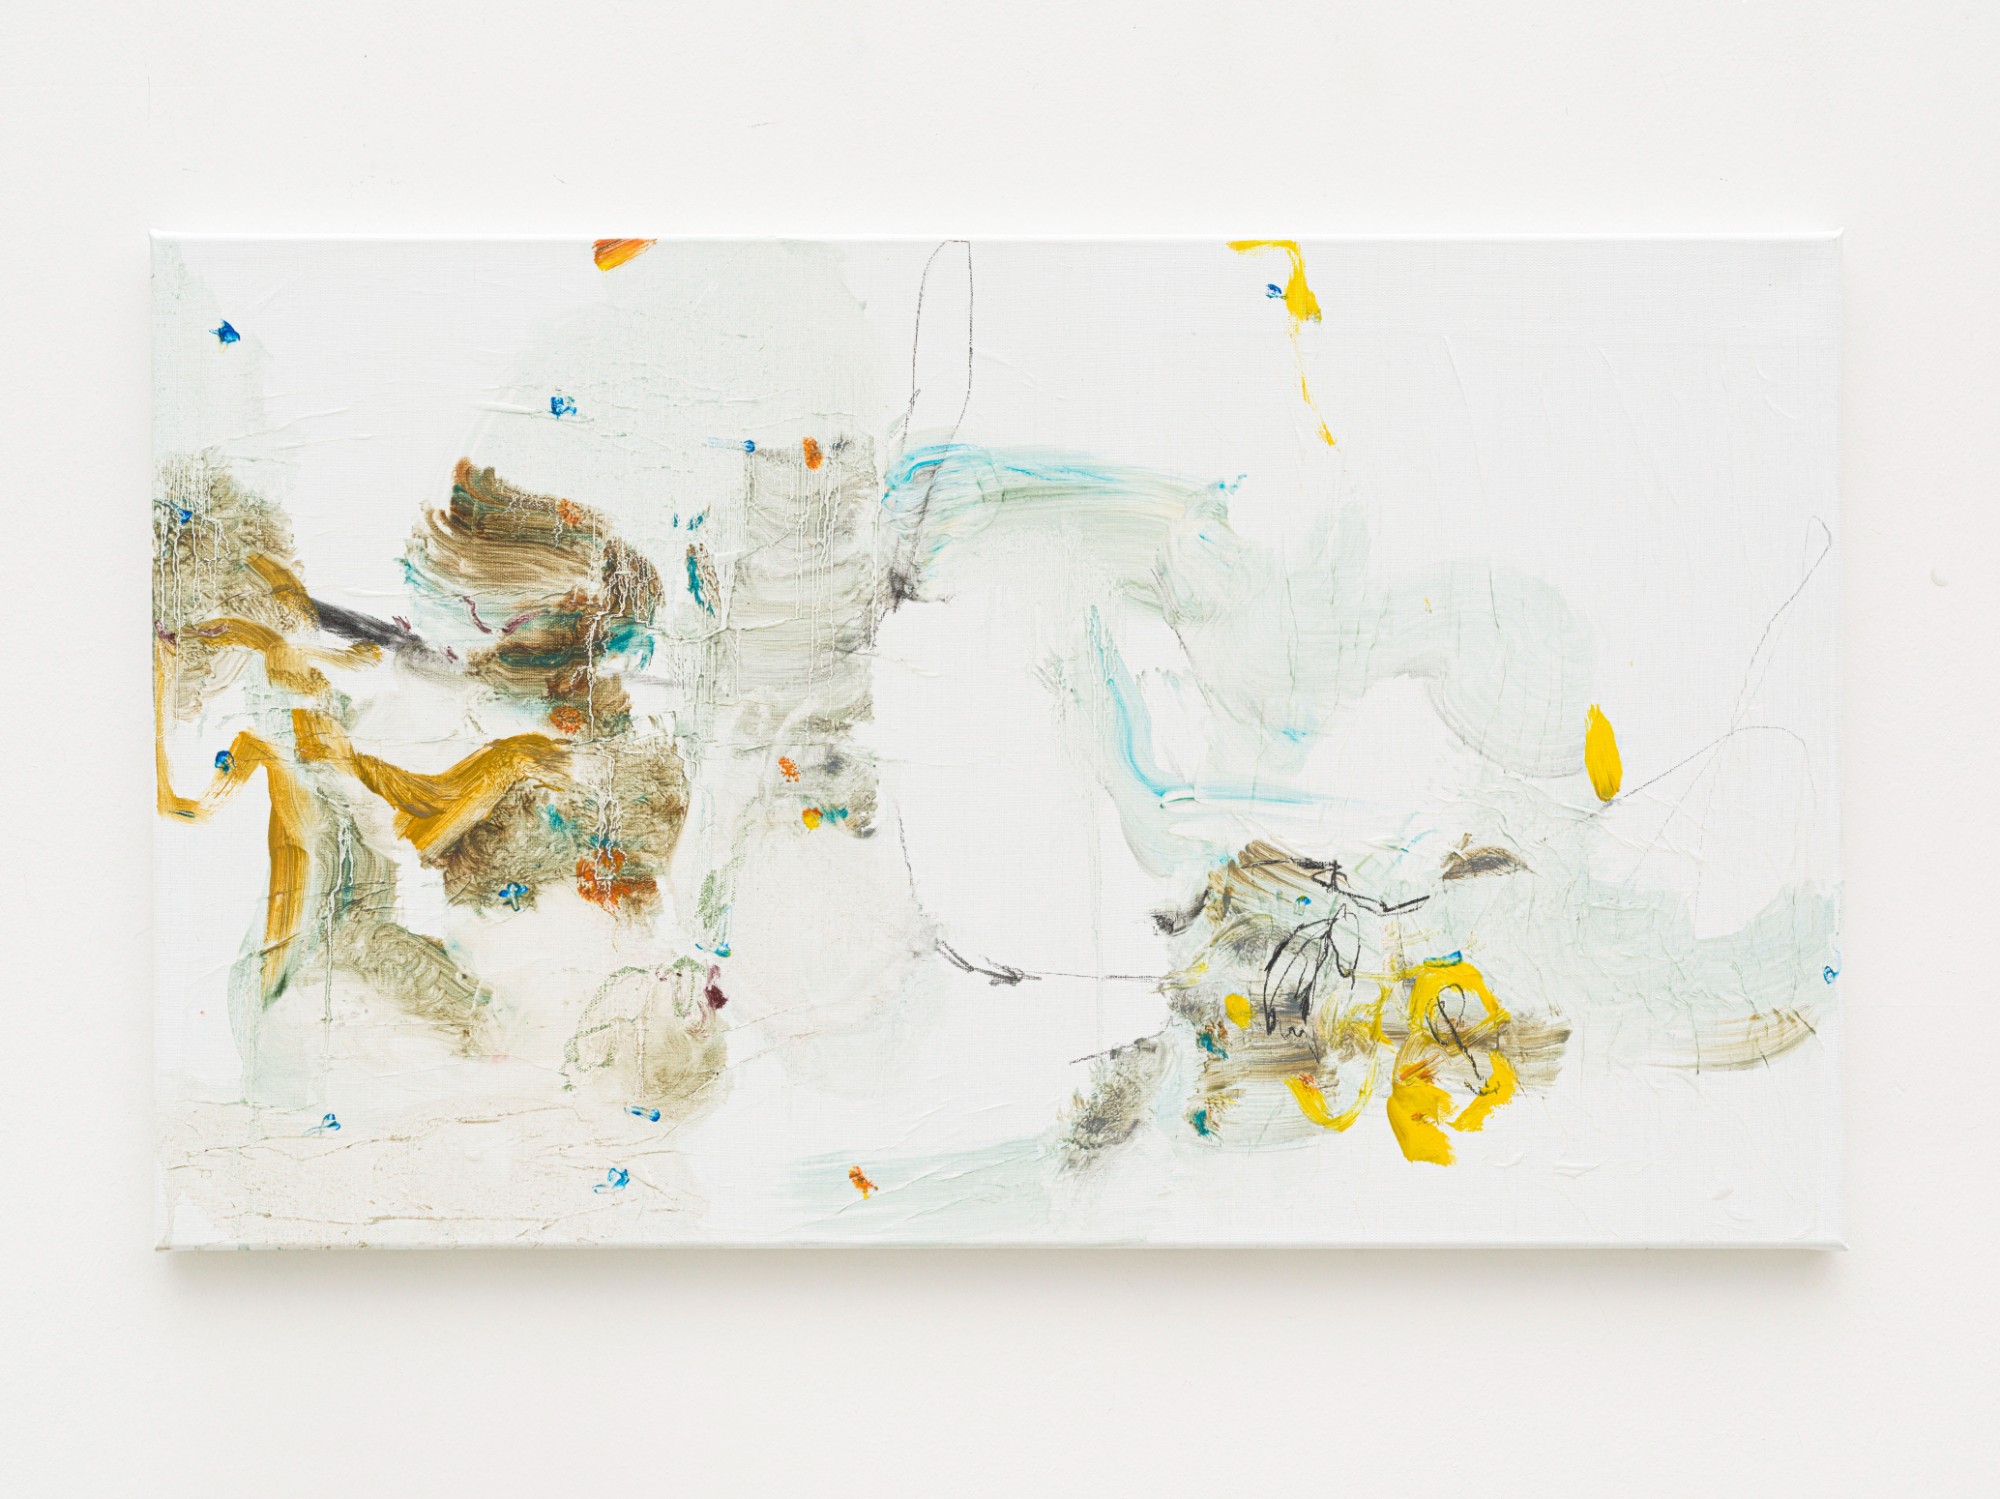 Hinako Miyabayashi, Leading with Cold Hands, 2023, oil and paper (tissue paper) on canvas, 60 x 100 cm